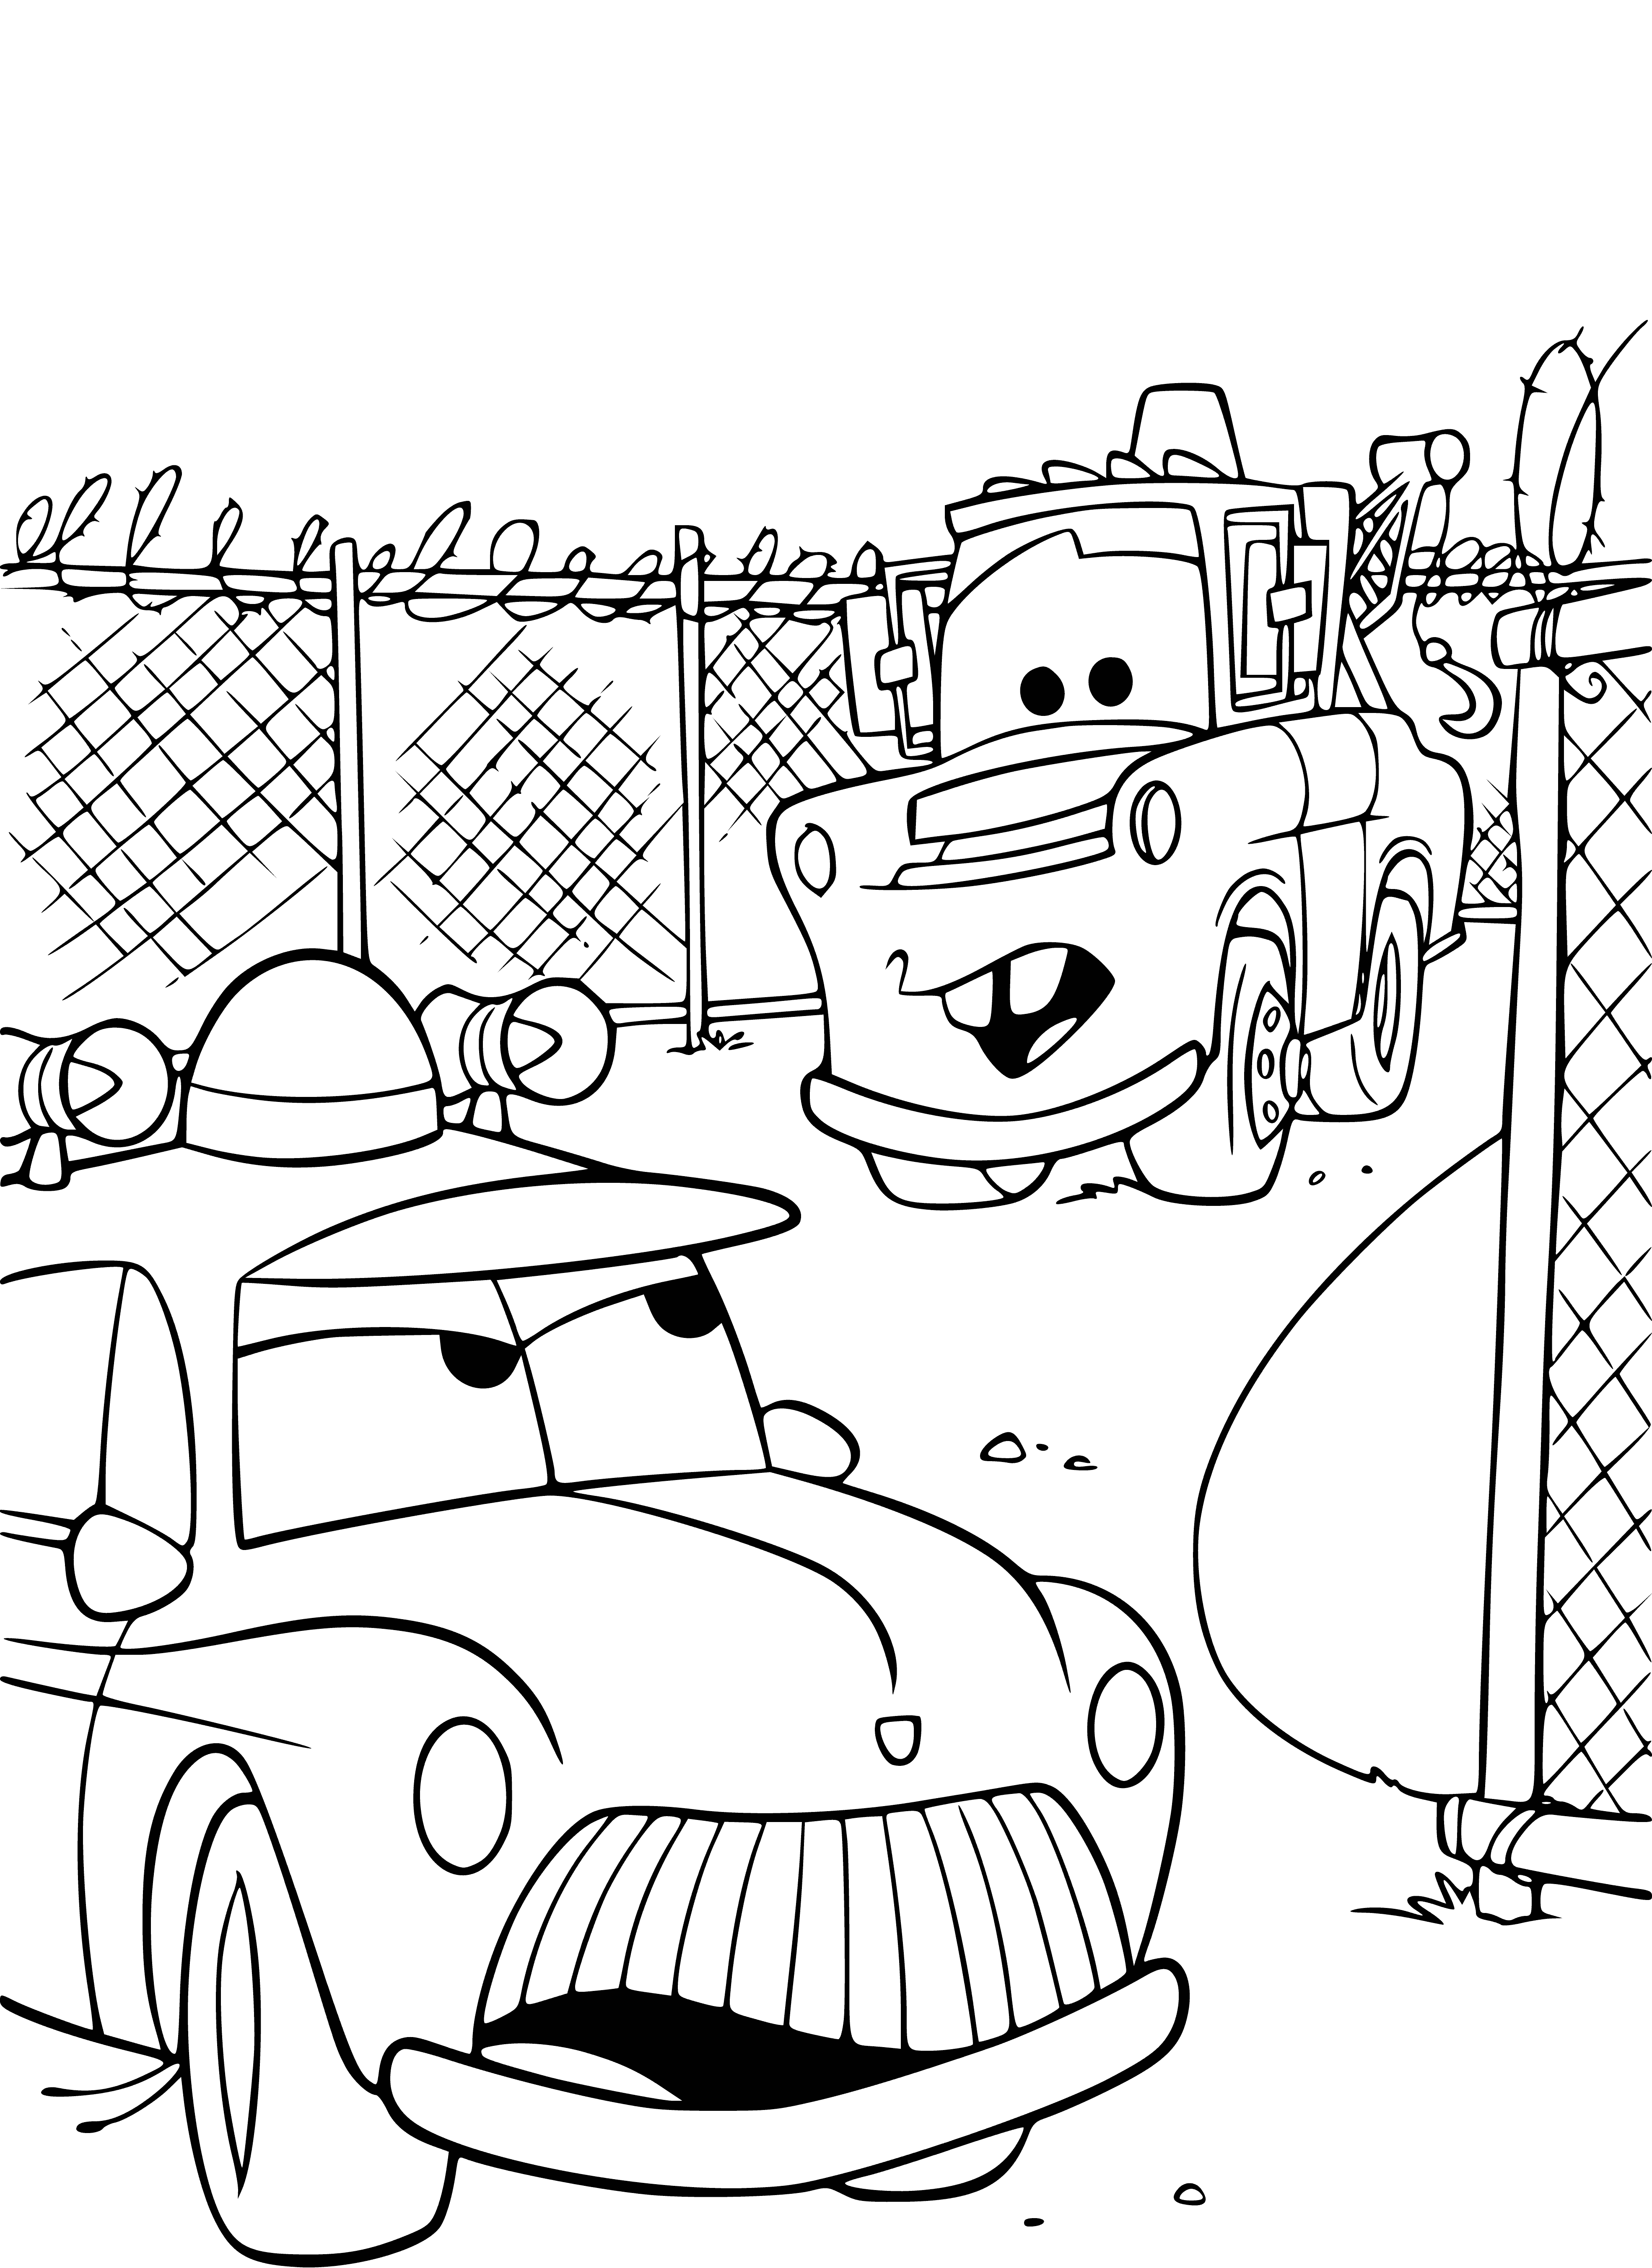 Sheriff and Maitre coloring page